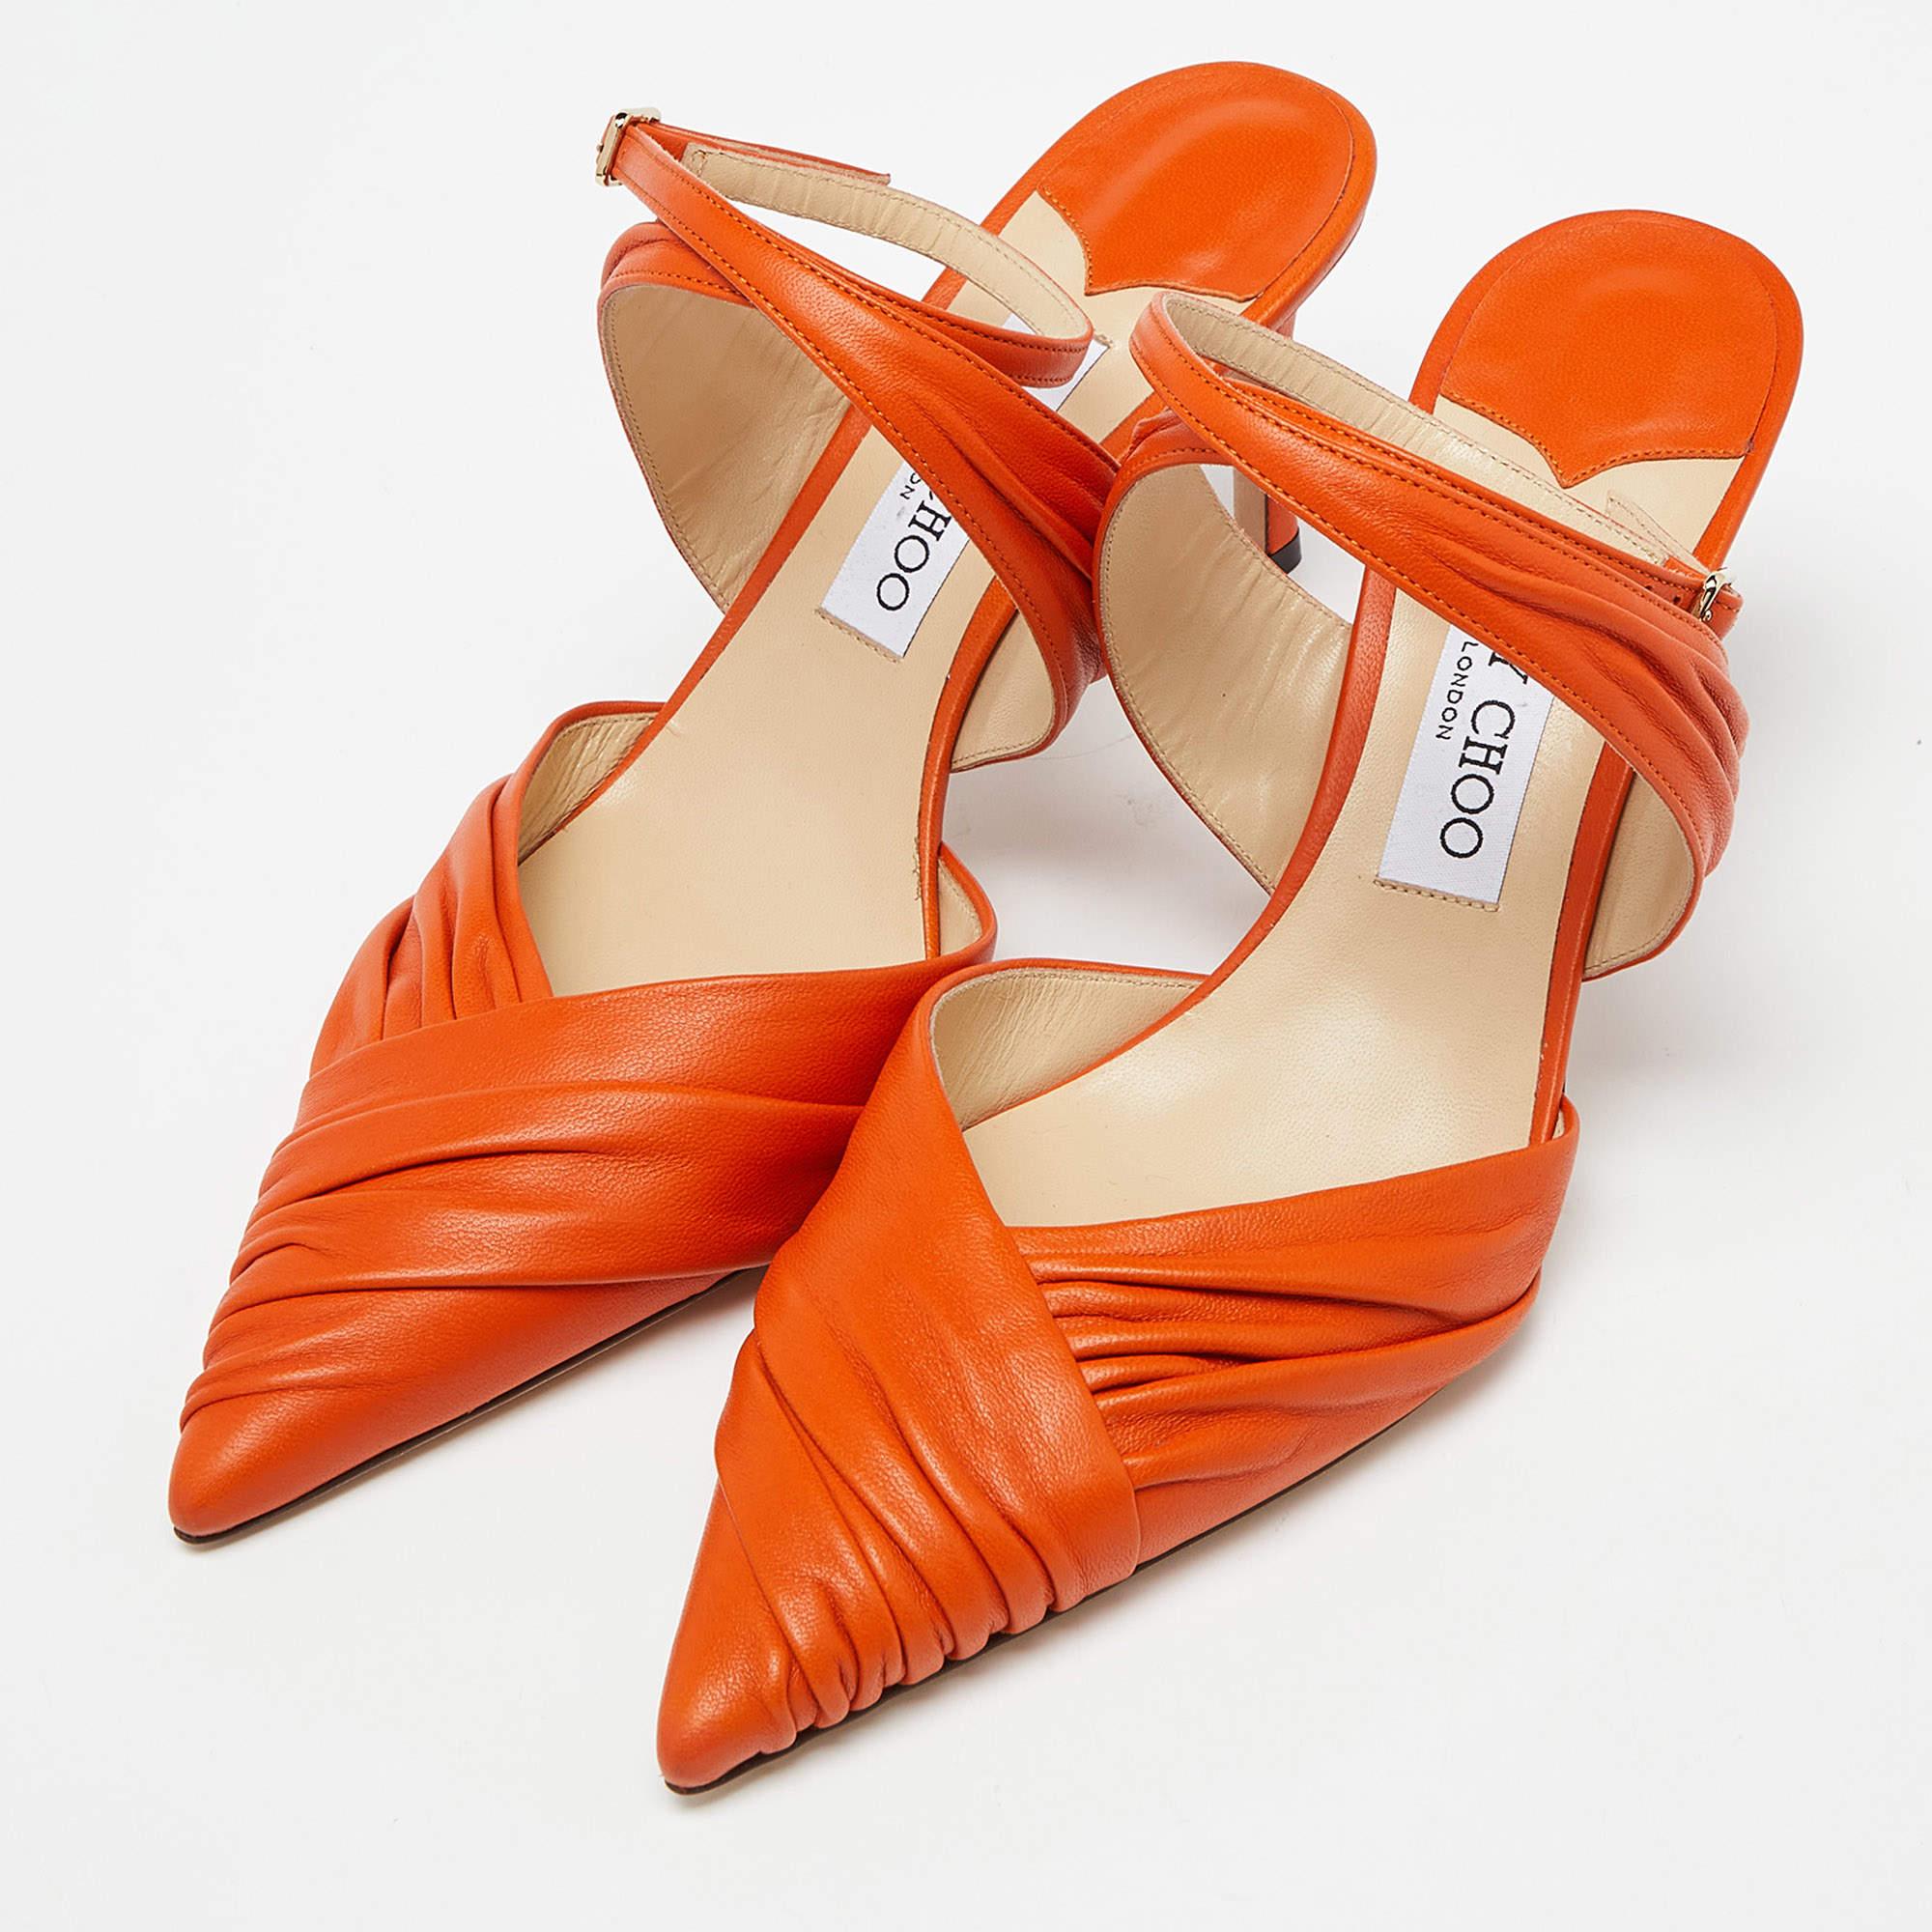 Jimmy Choo Orange Leather Pointed Toe Ankle Strap Pumps Size 39 For Sale 1